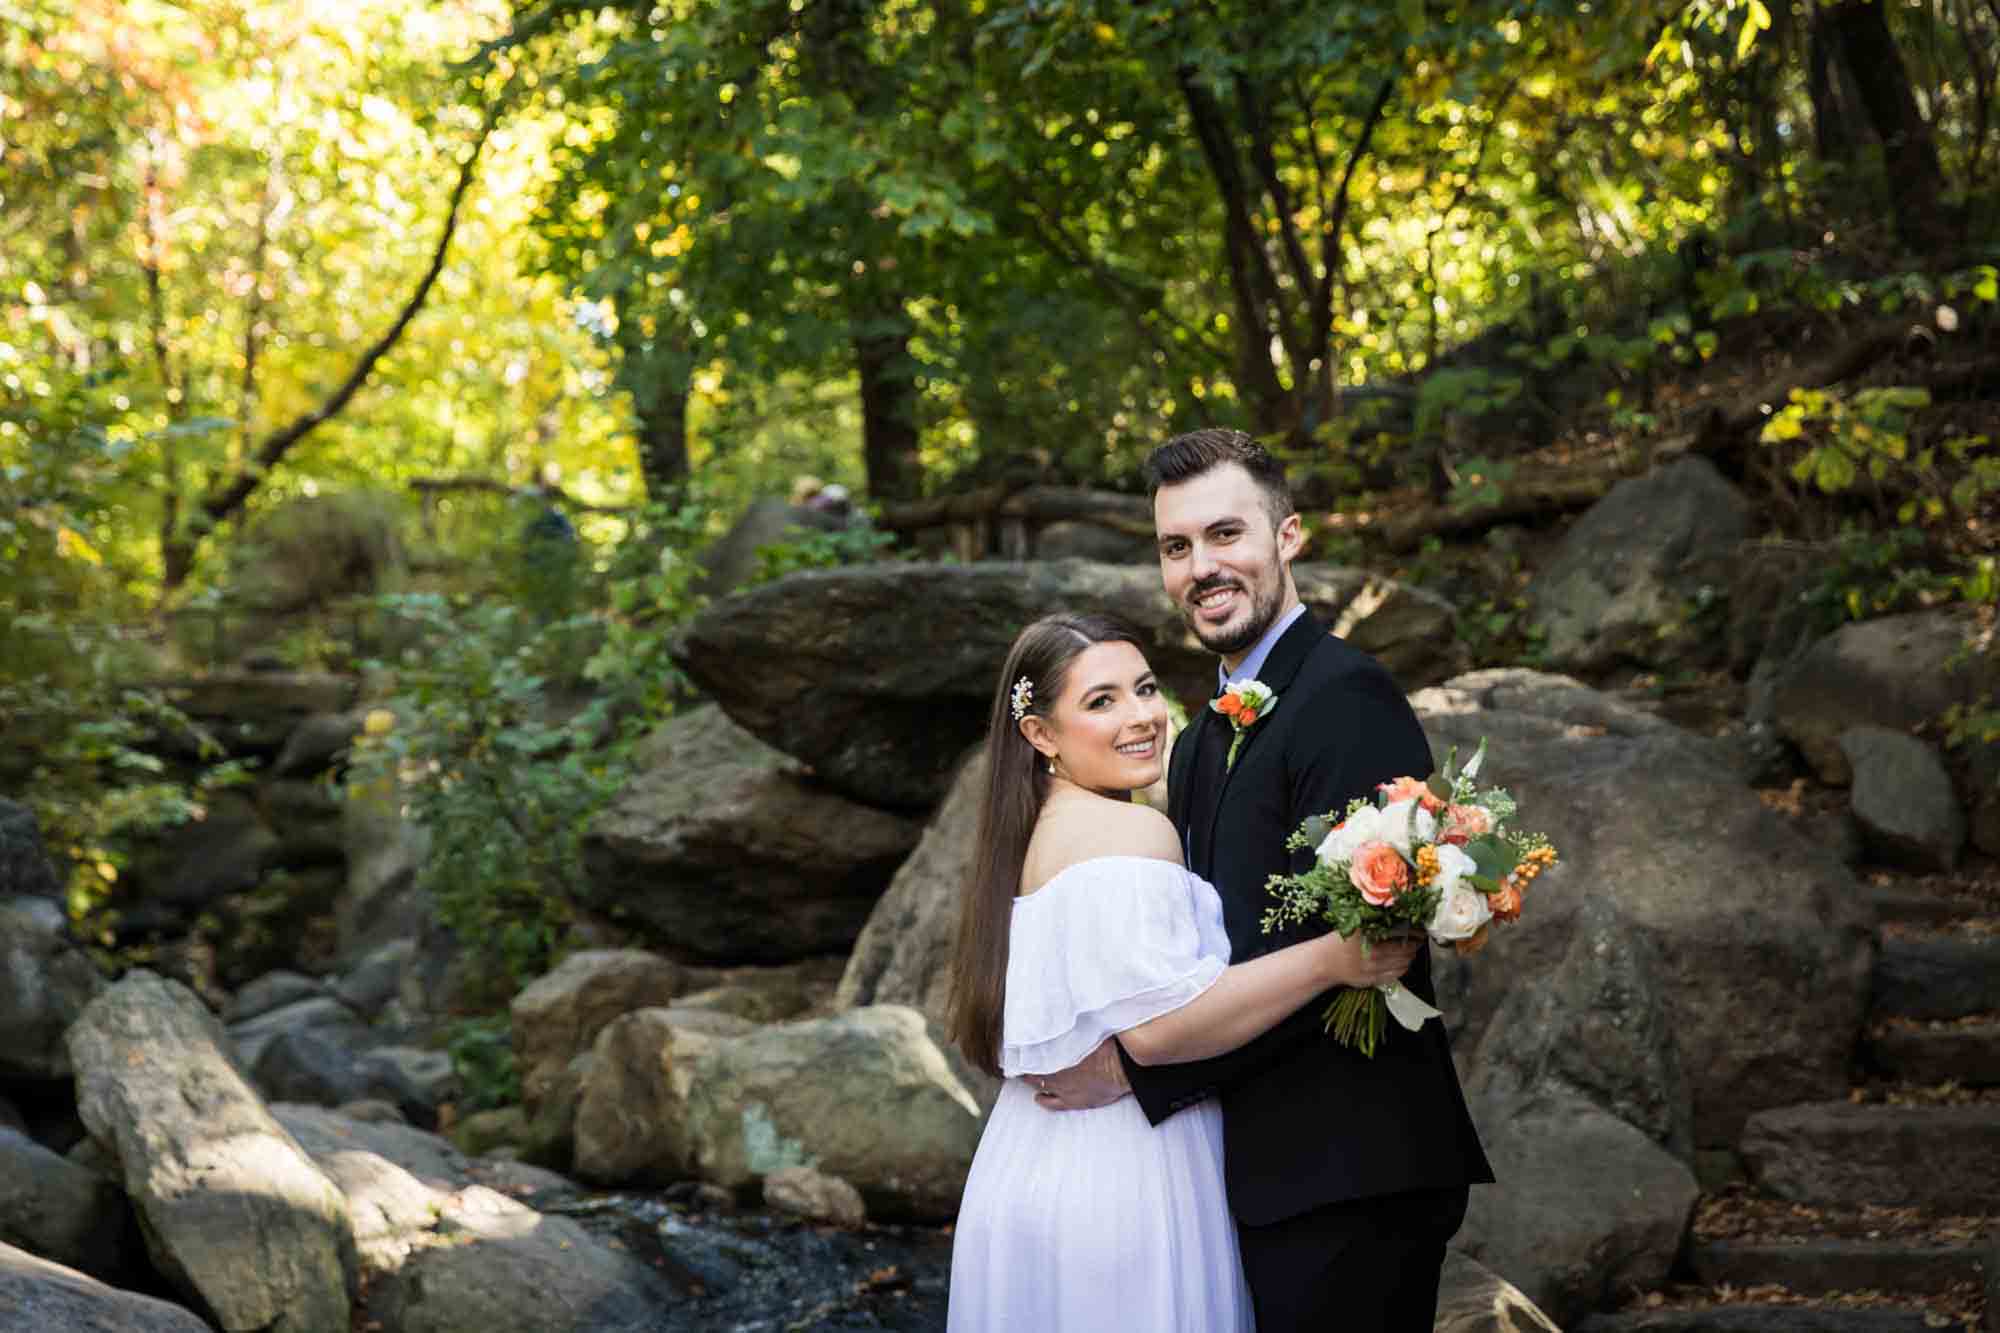 Bride and groom hugging in front of rocks in forest after Central Park elopement